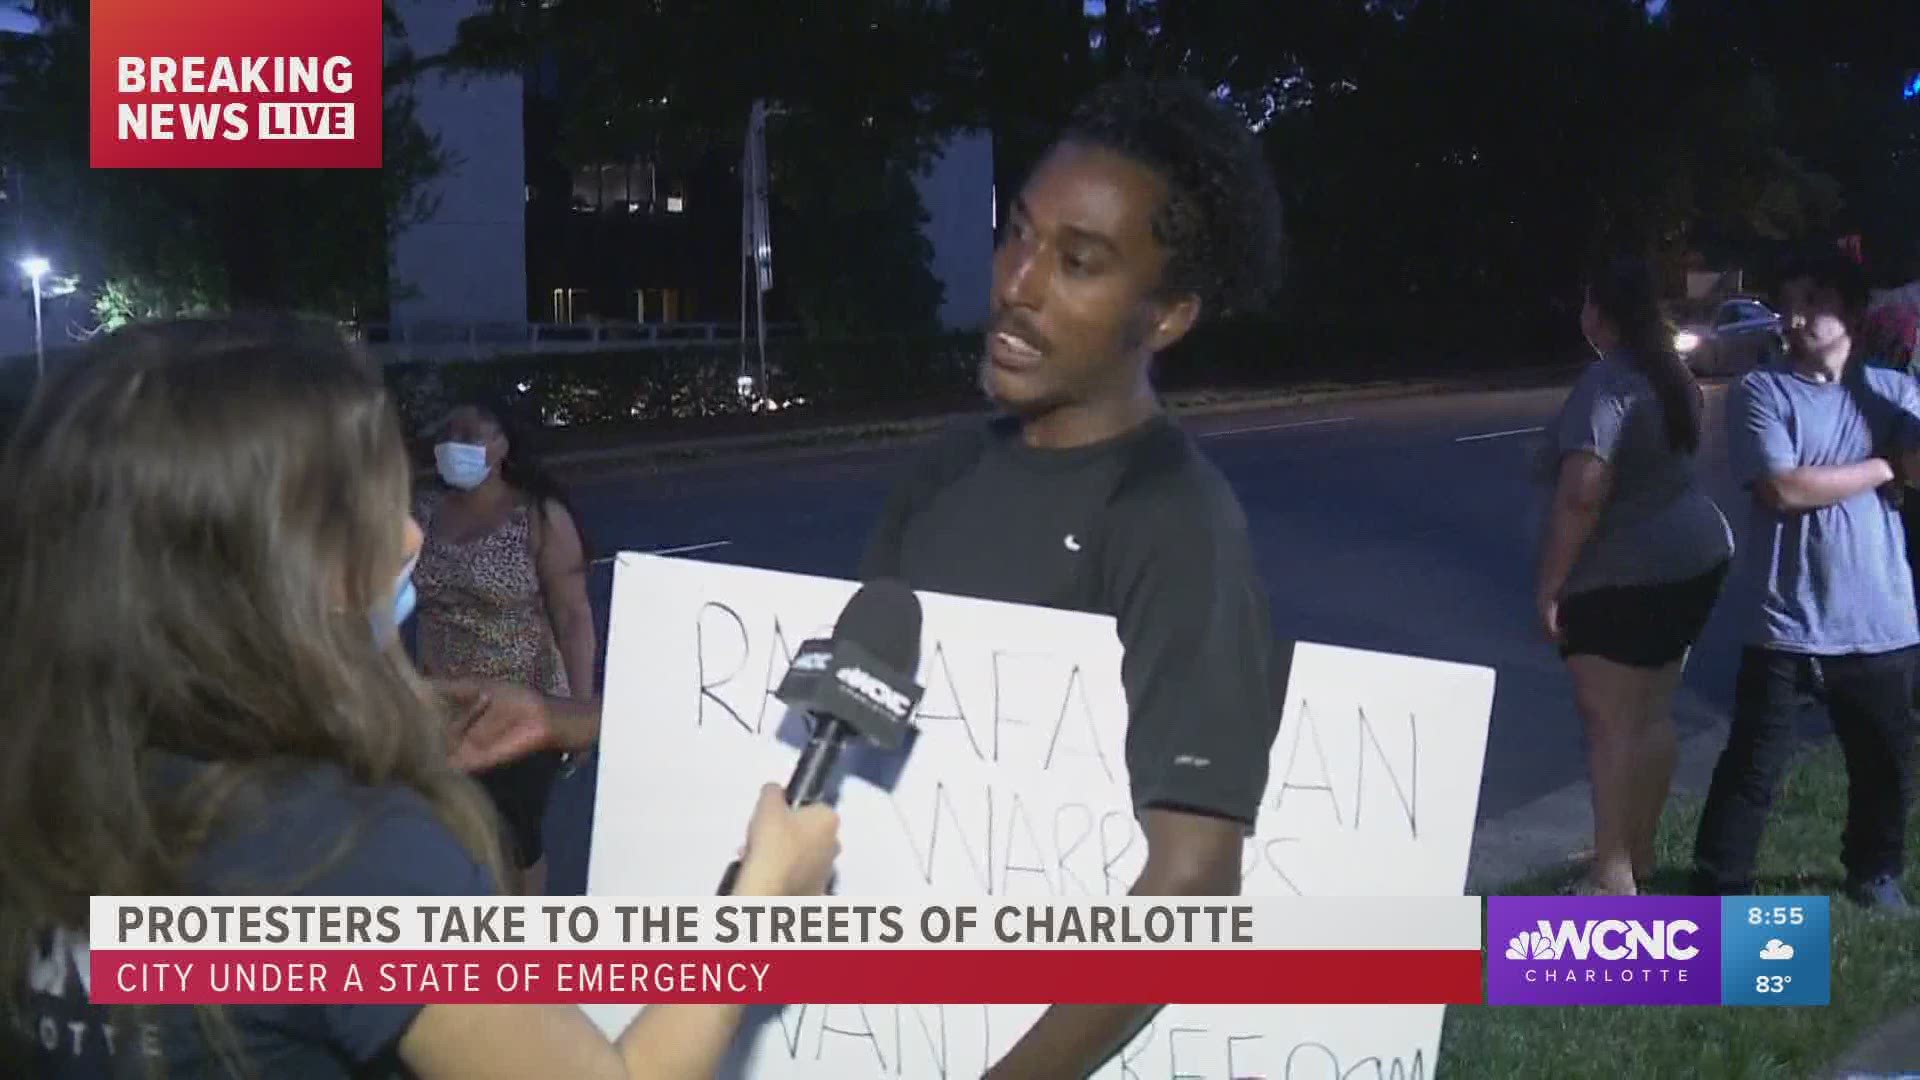 A Jamaican man protesting in uptown Charlotte told WCNC Charlotte he feels everyone needs to come together as one.